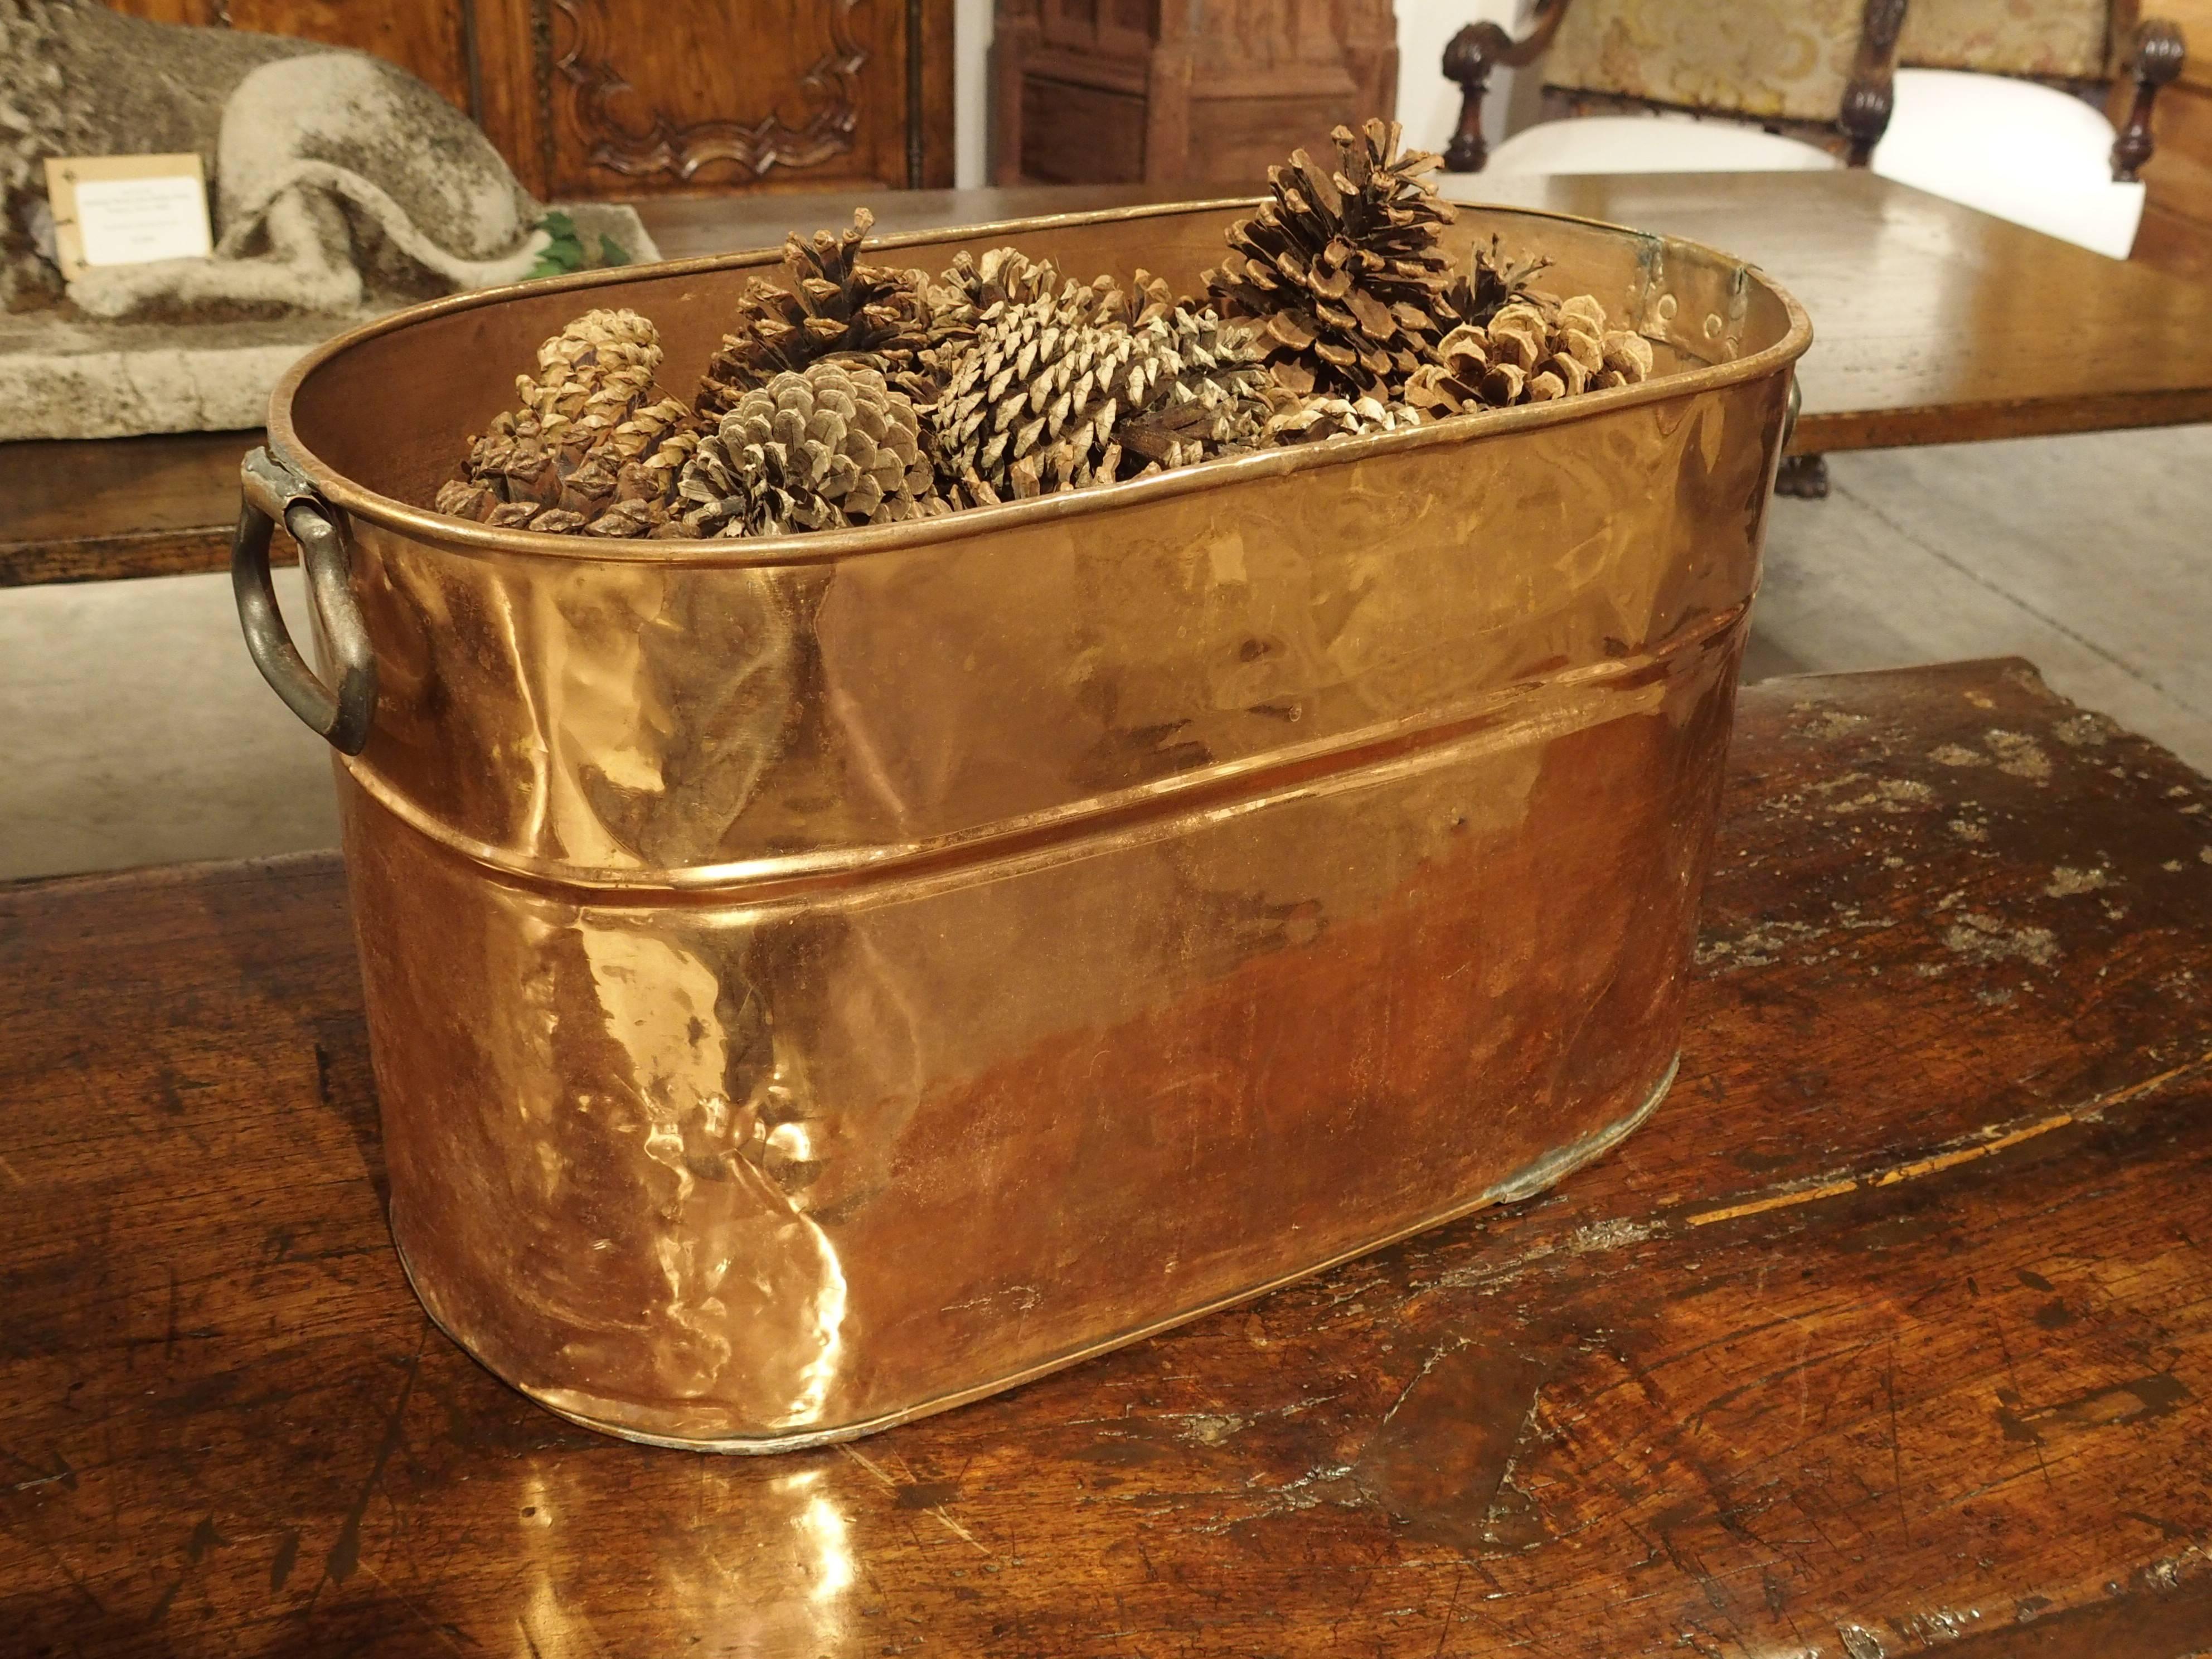 This large antique French, oval, copper container is just the right size for displaying anything from dried flowers to toys. Other uses can be storage for small kindling wood, a wine cooler or as a planter. Versatile in its uses, this antique French